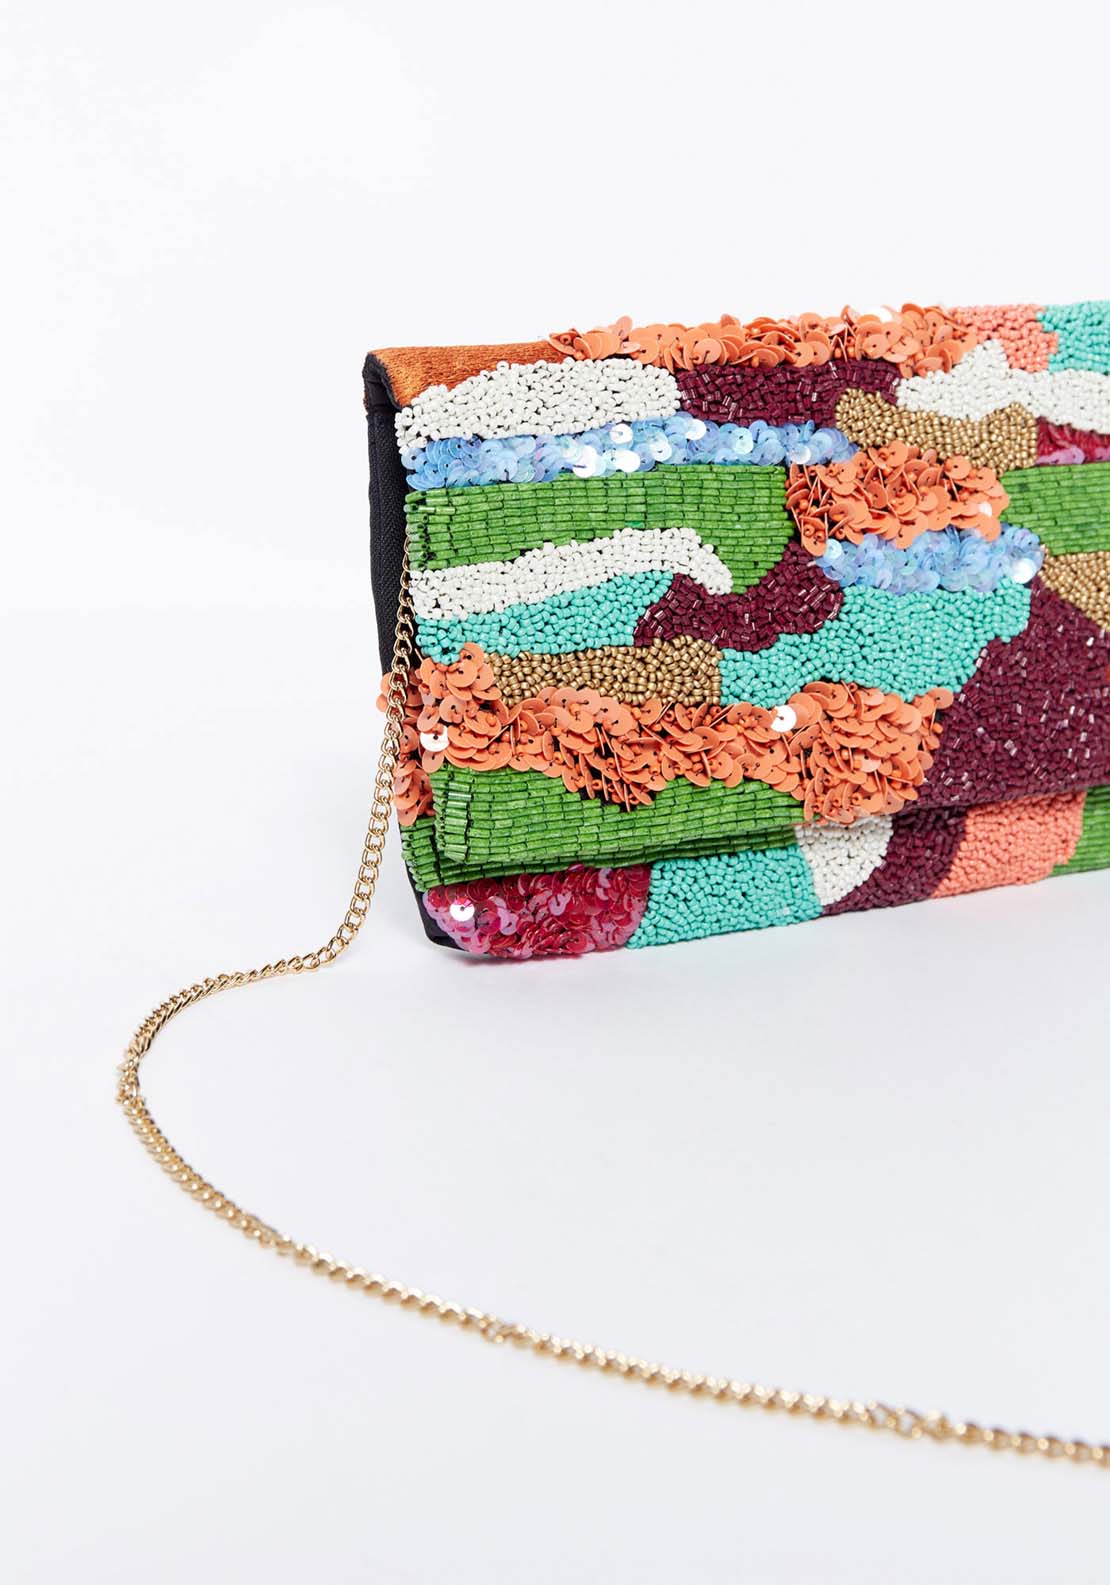 Sfera Beads clutch bag 2 Shaws Department Stores